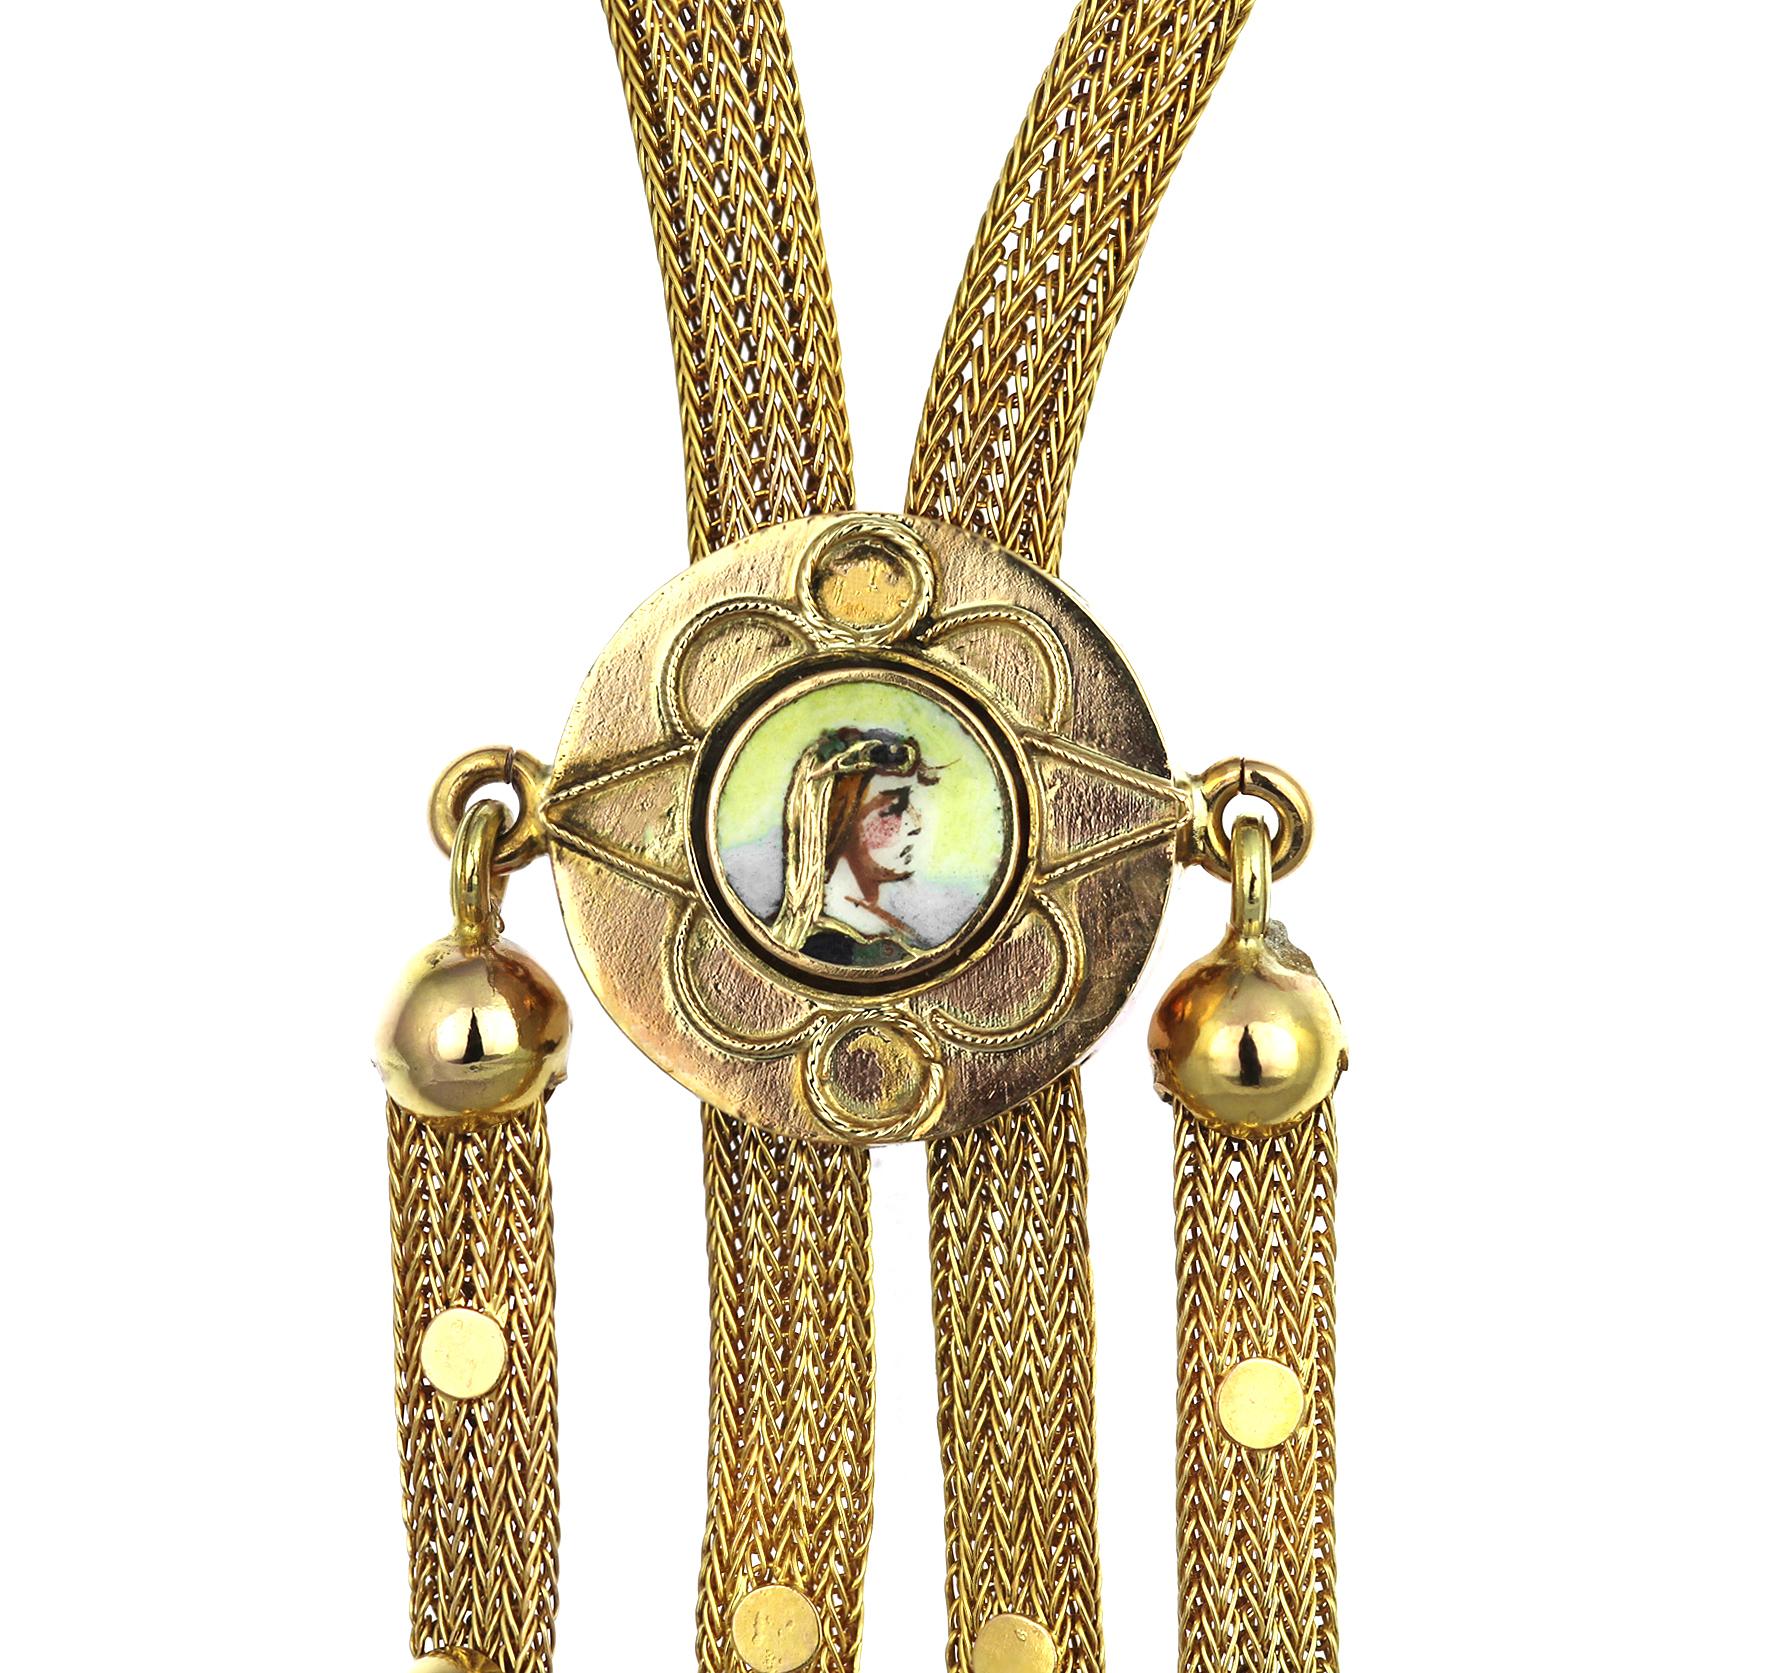 Early Victorian Antique 1880 12K Gold Long Chain/Necklace with Tassel Links with Enamel Panel For Sale